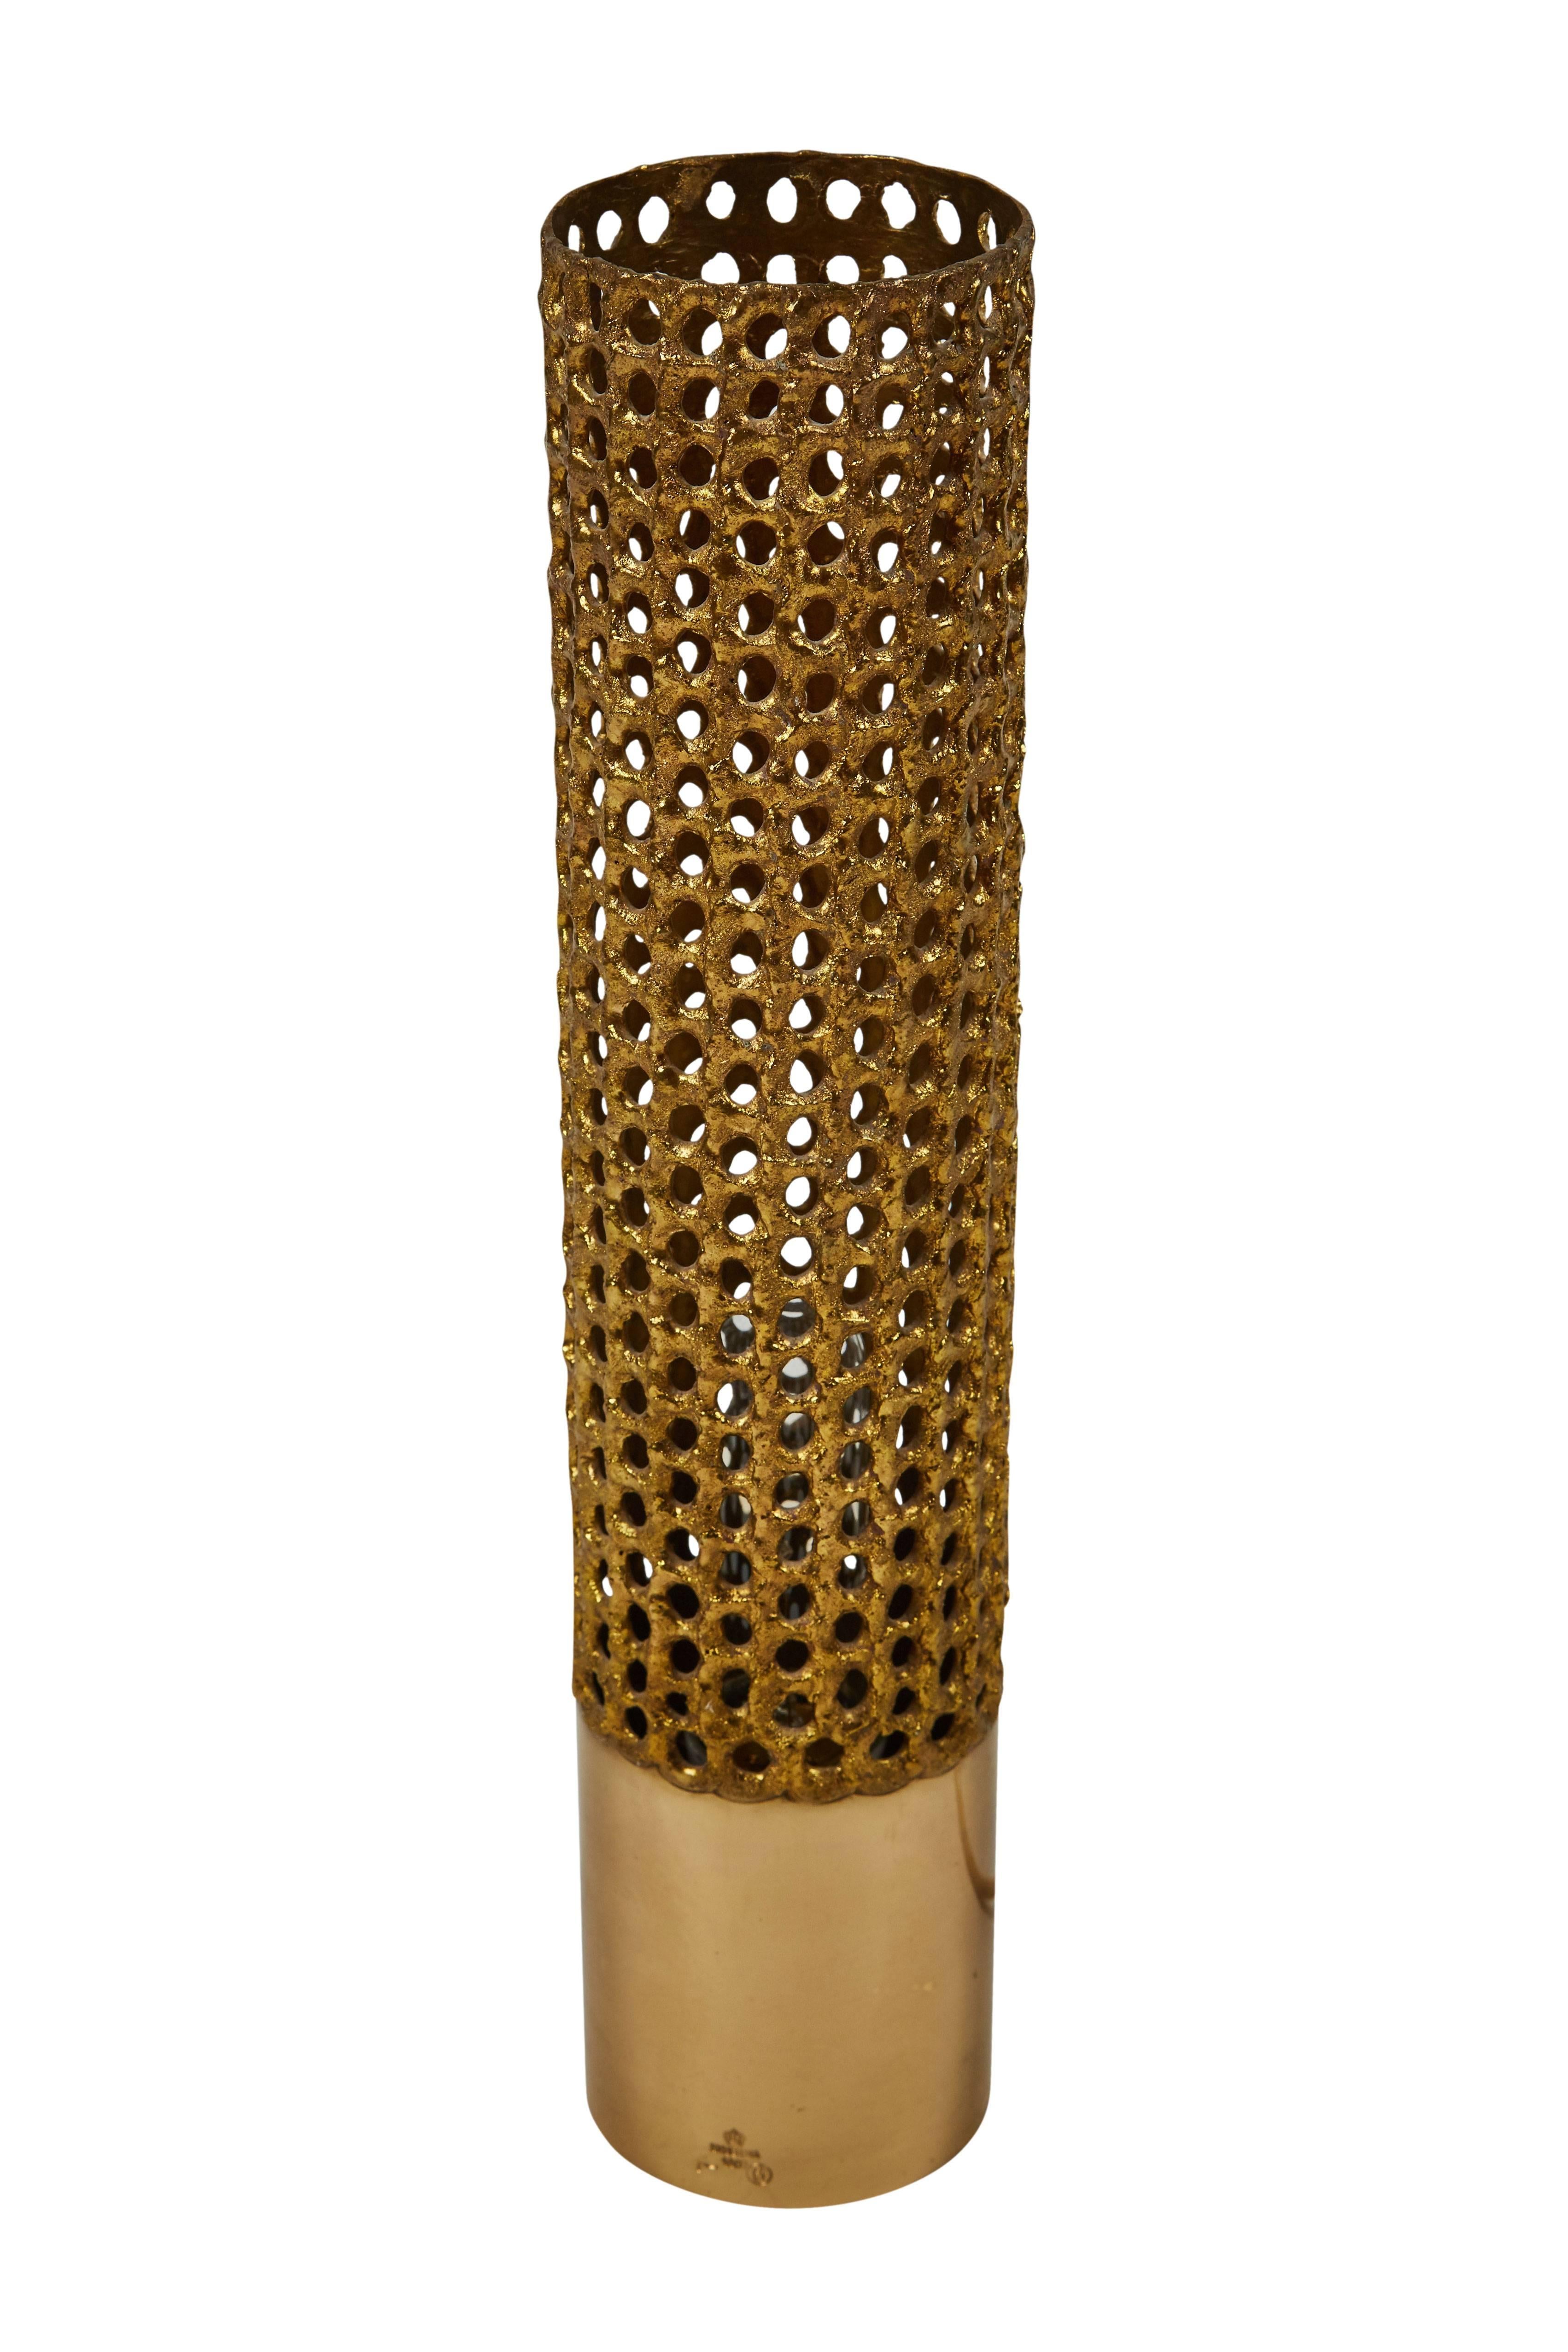 Rare brass table lamp designed by Pierre Forsell for Skultuna of Sweden, circa 1960s. Handmade 